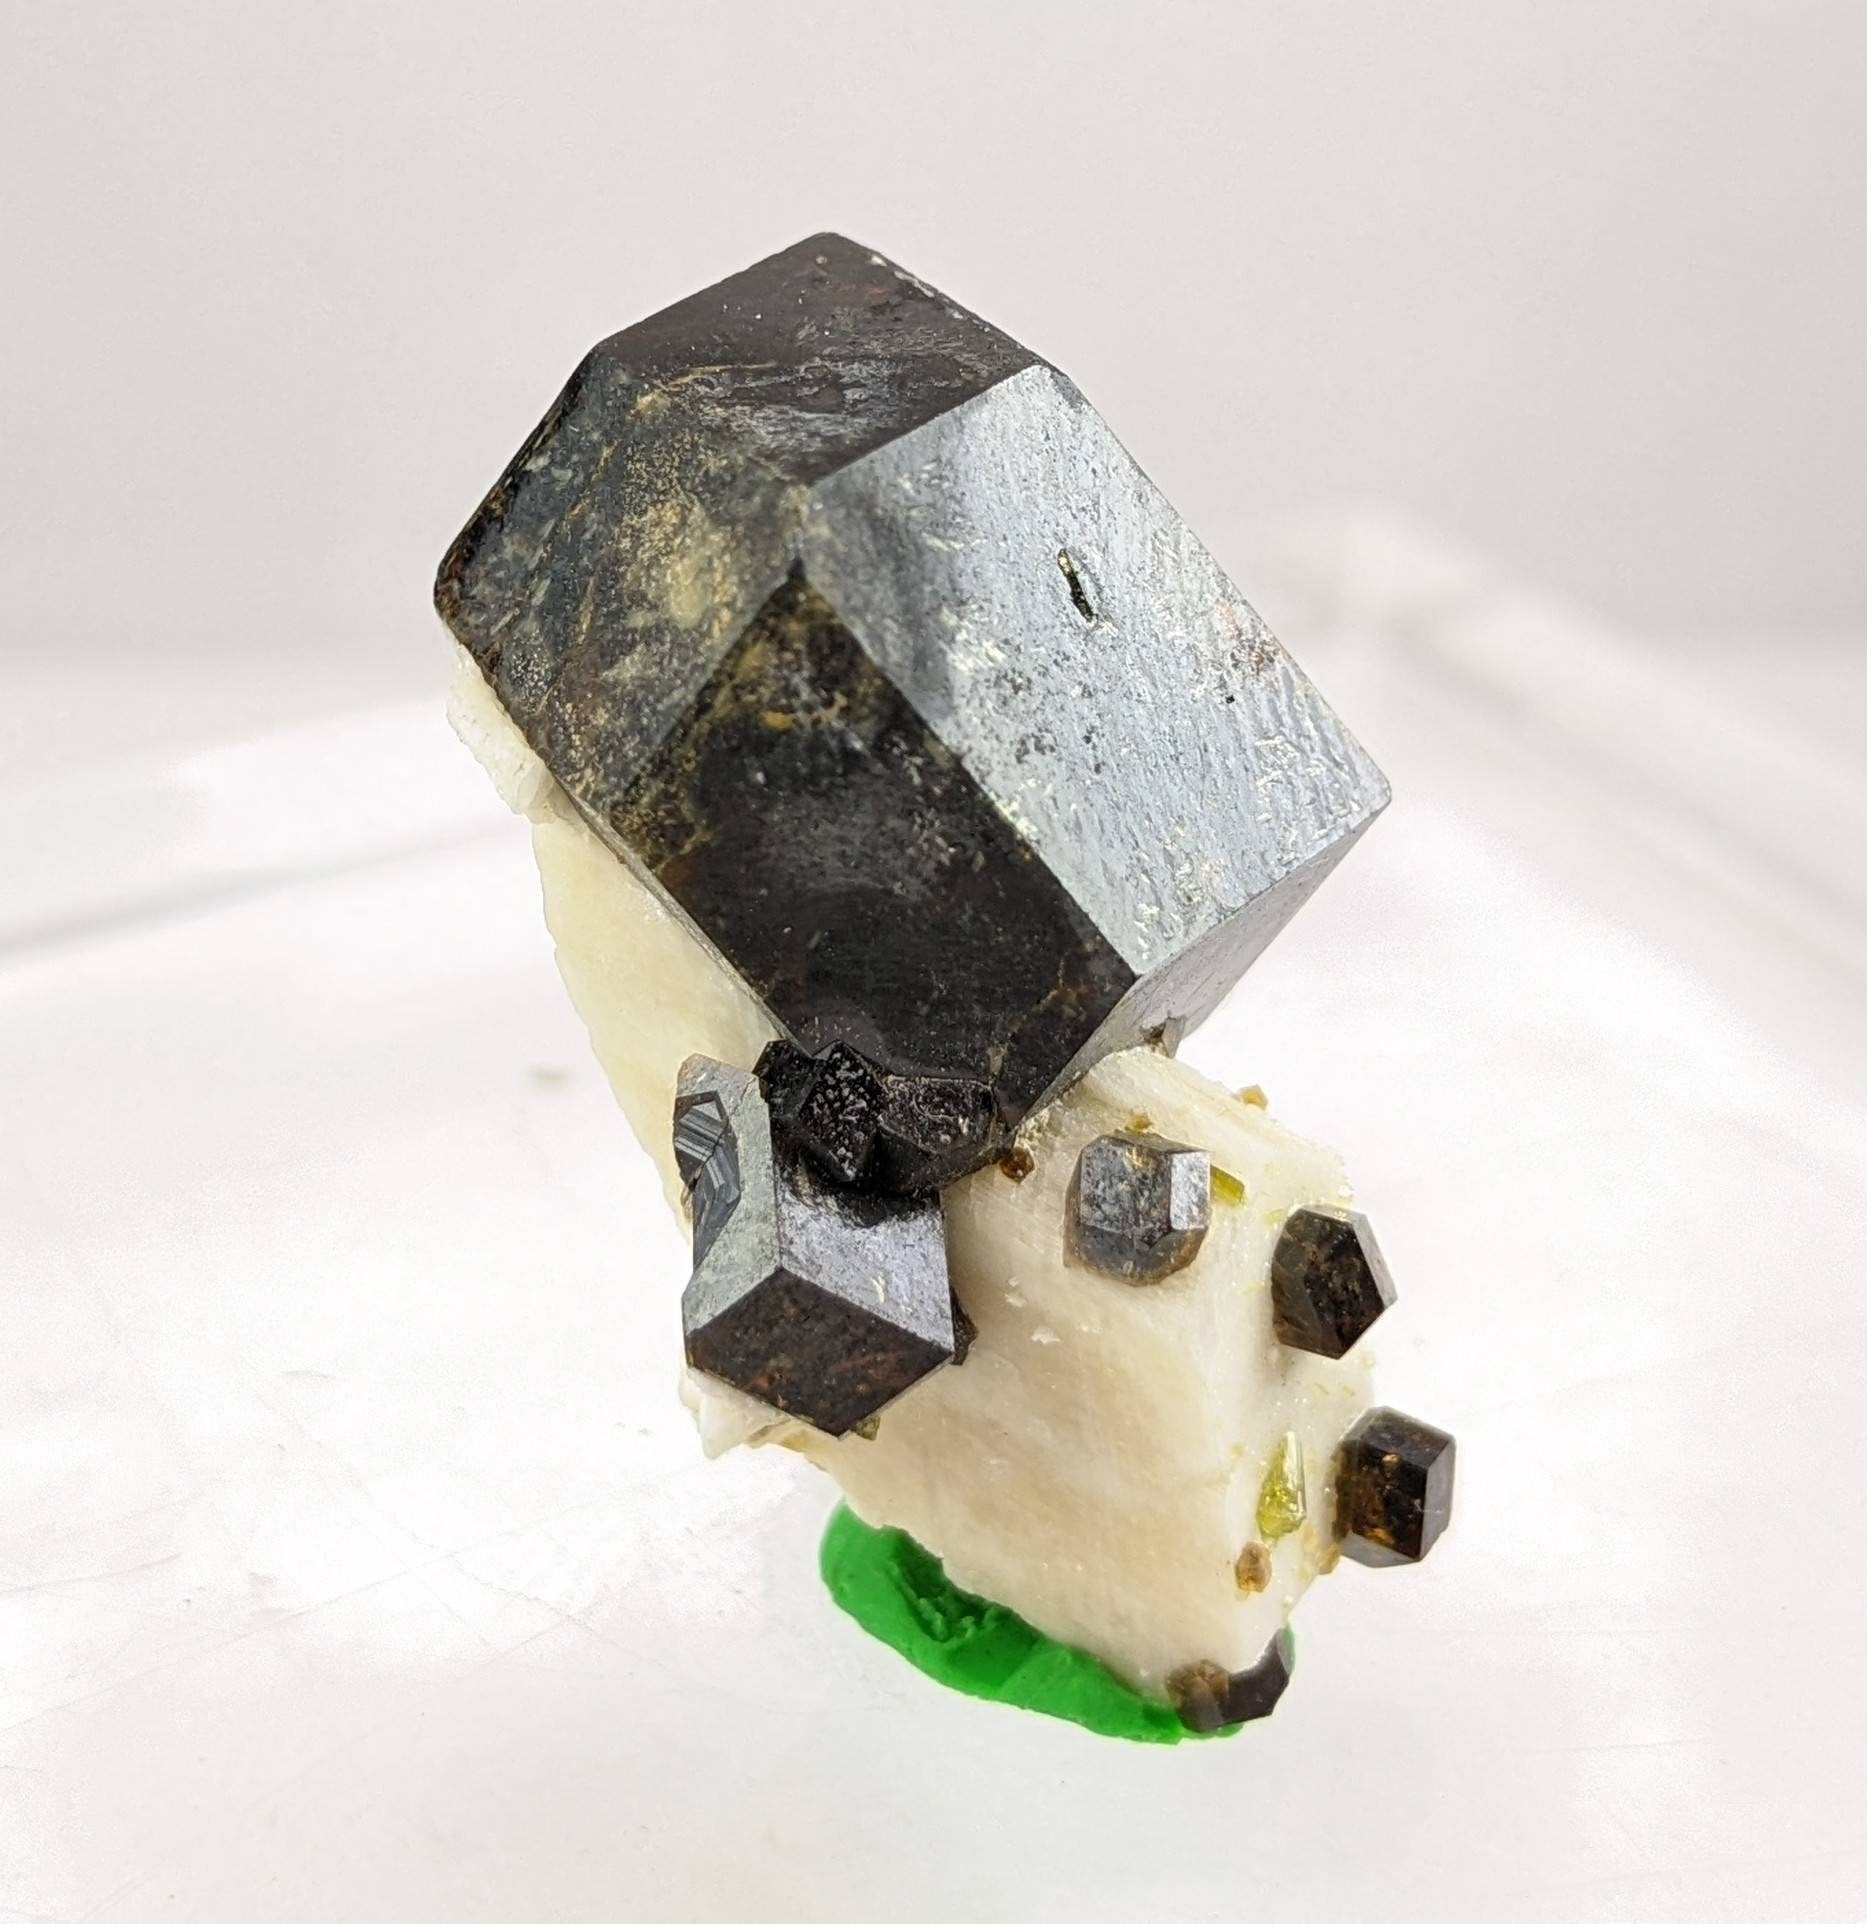 ARSAA GEMS AND MINERALSOn matrix andradite garnet with green epidote crystals from Pakistan, 7.5 grams - Premium  from ARSAA GEMS AND MINERALS - Just $30.00! Shop now at ARSAA GEMS AND MINERALS